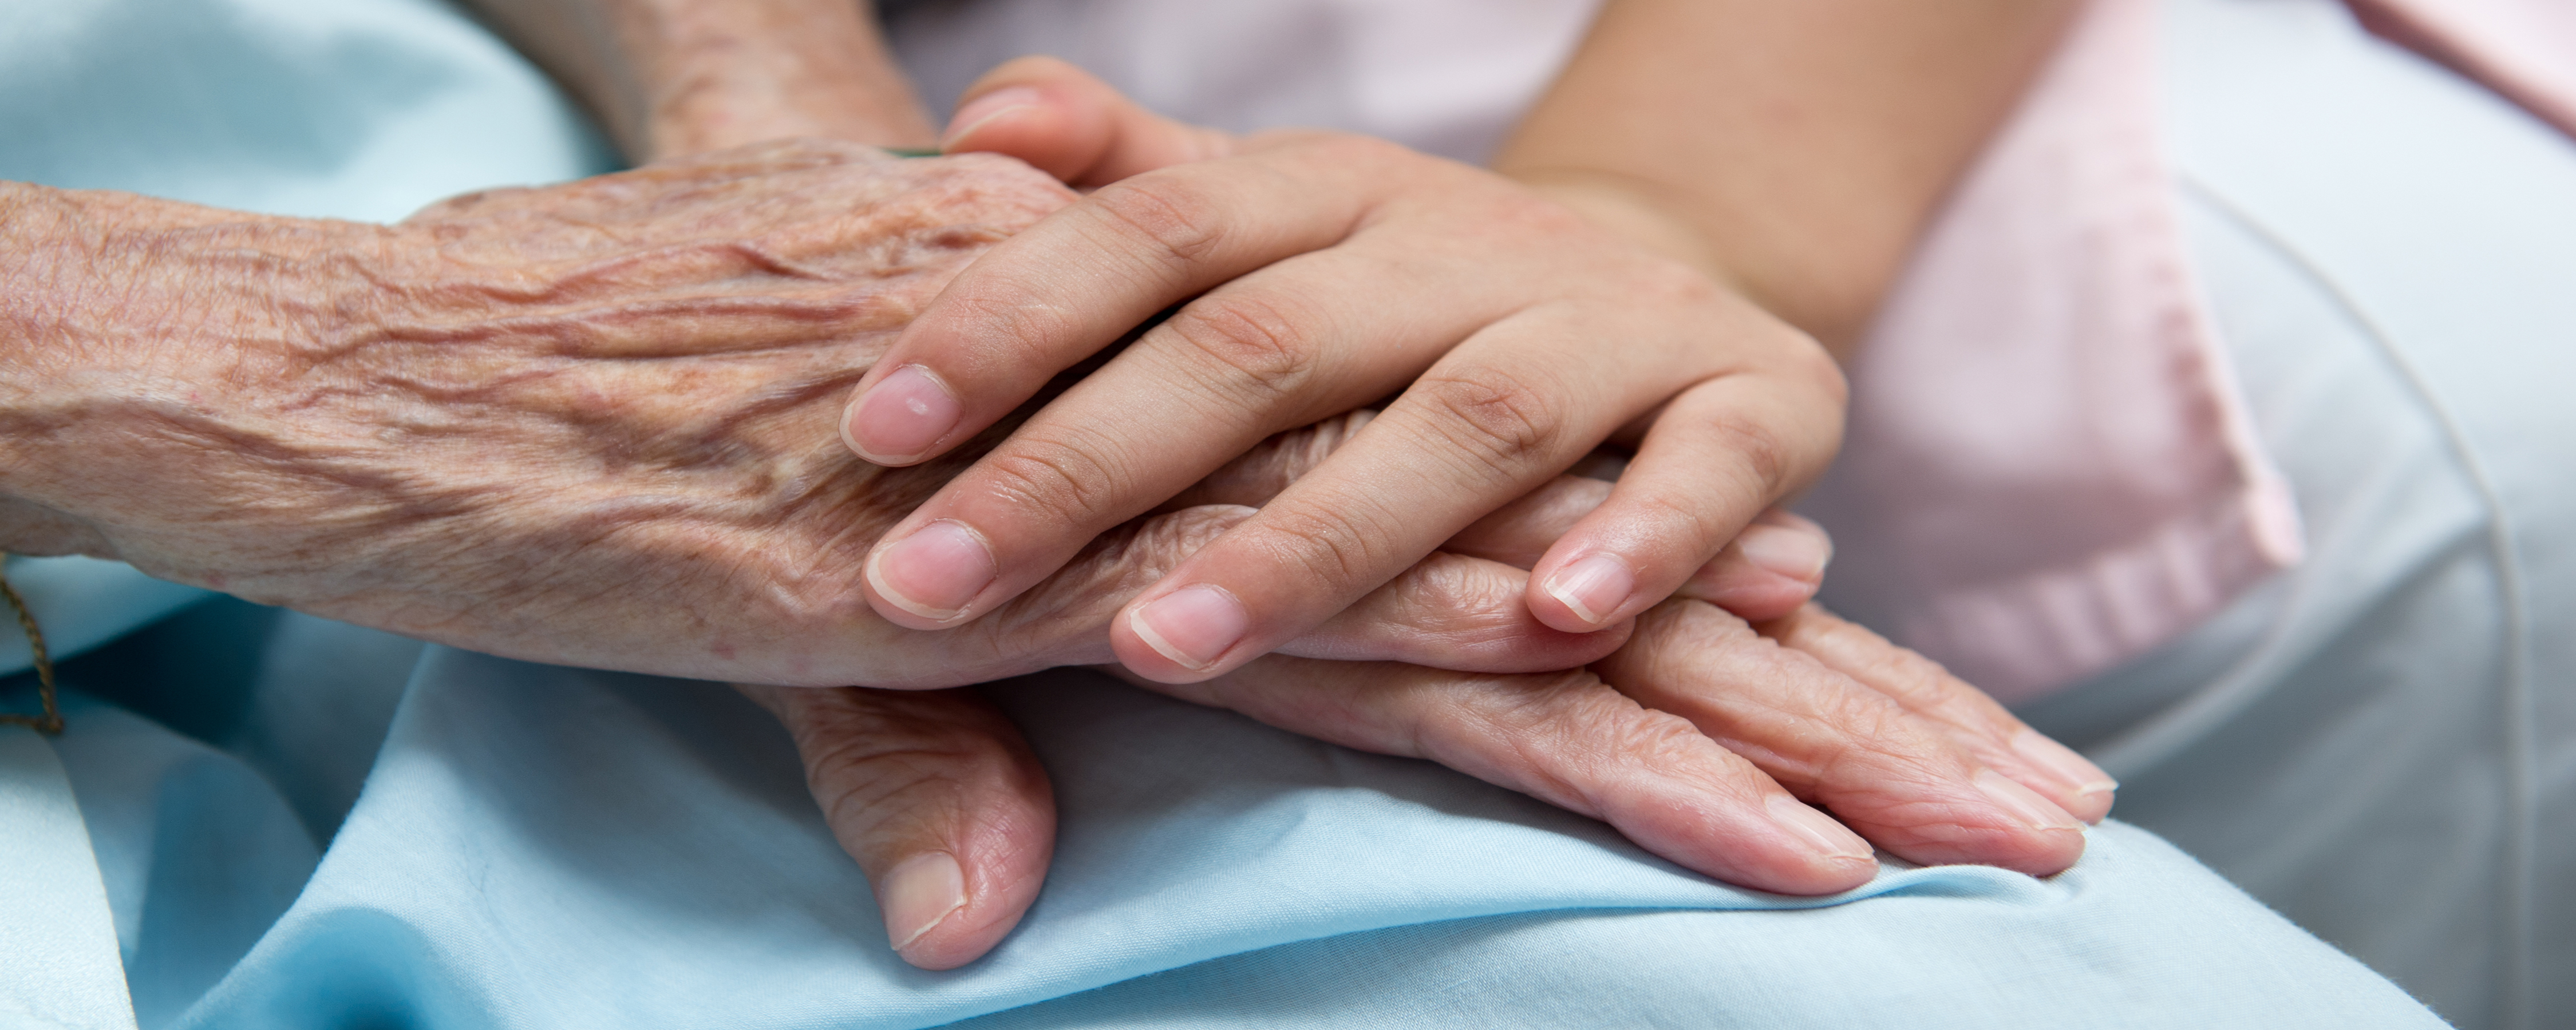 Aging adult and younger person holding hands